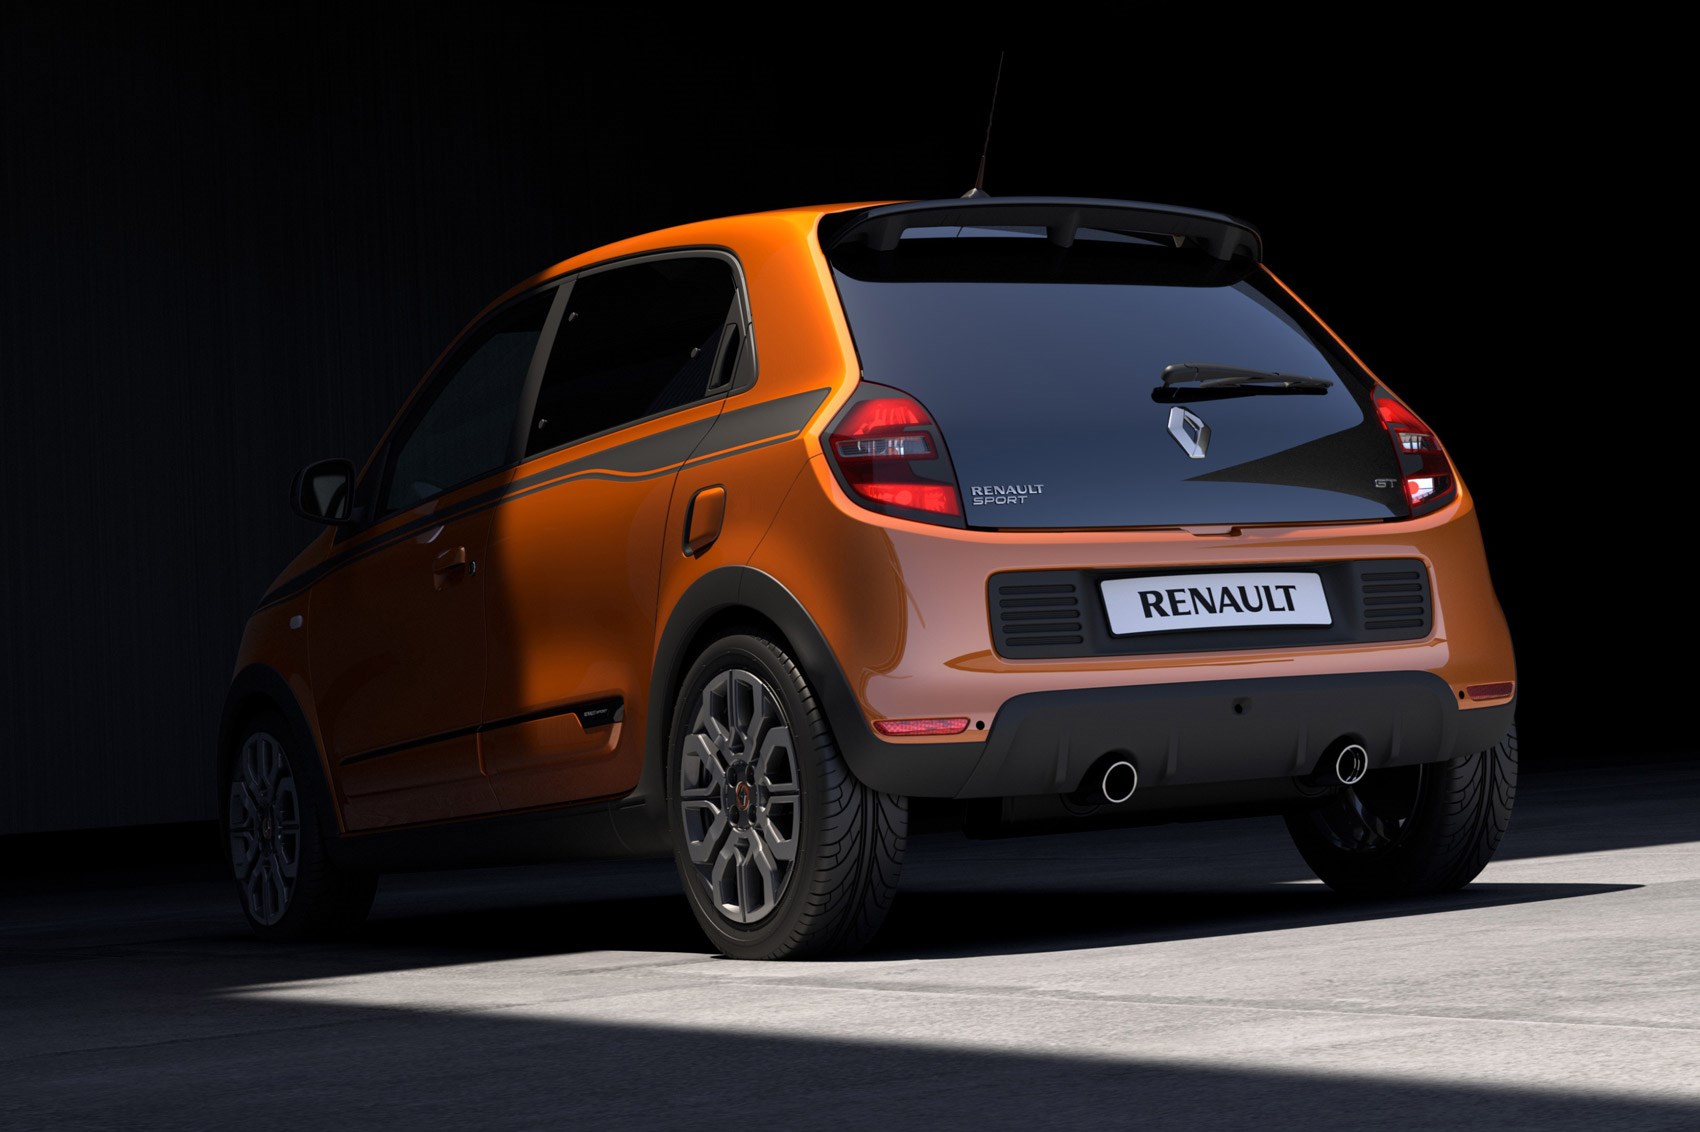 This 'Iconic' is the current range-topping Renault Twingo